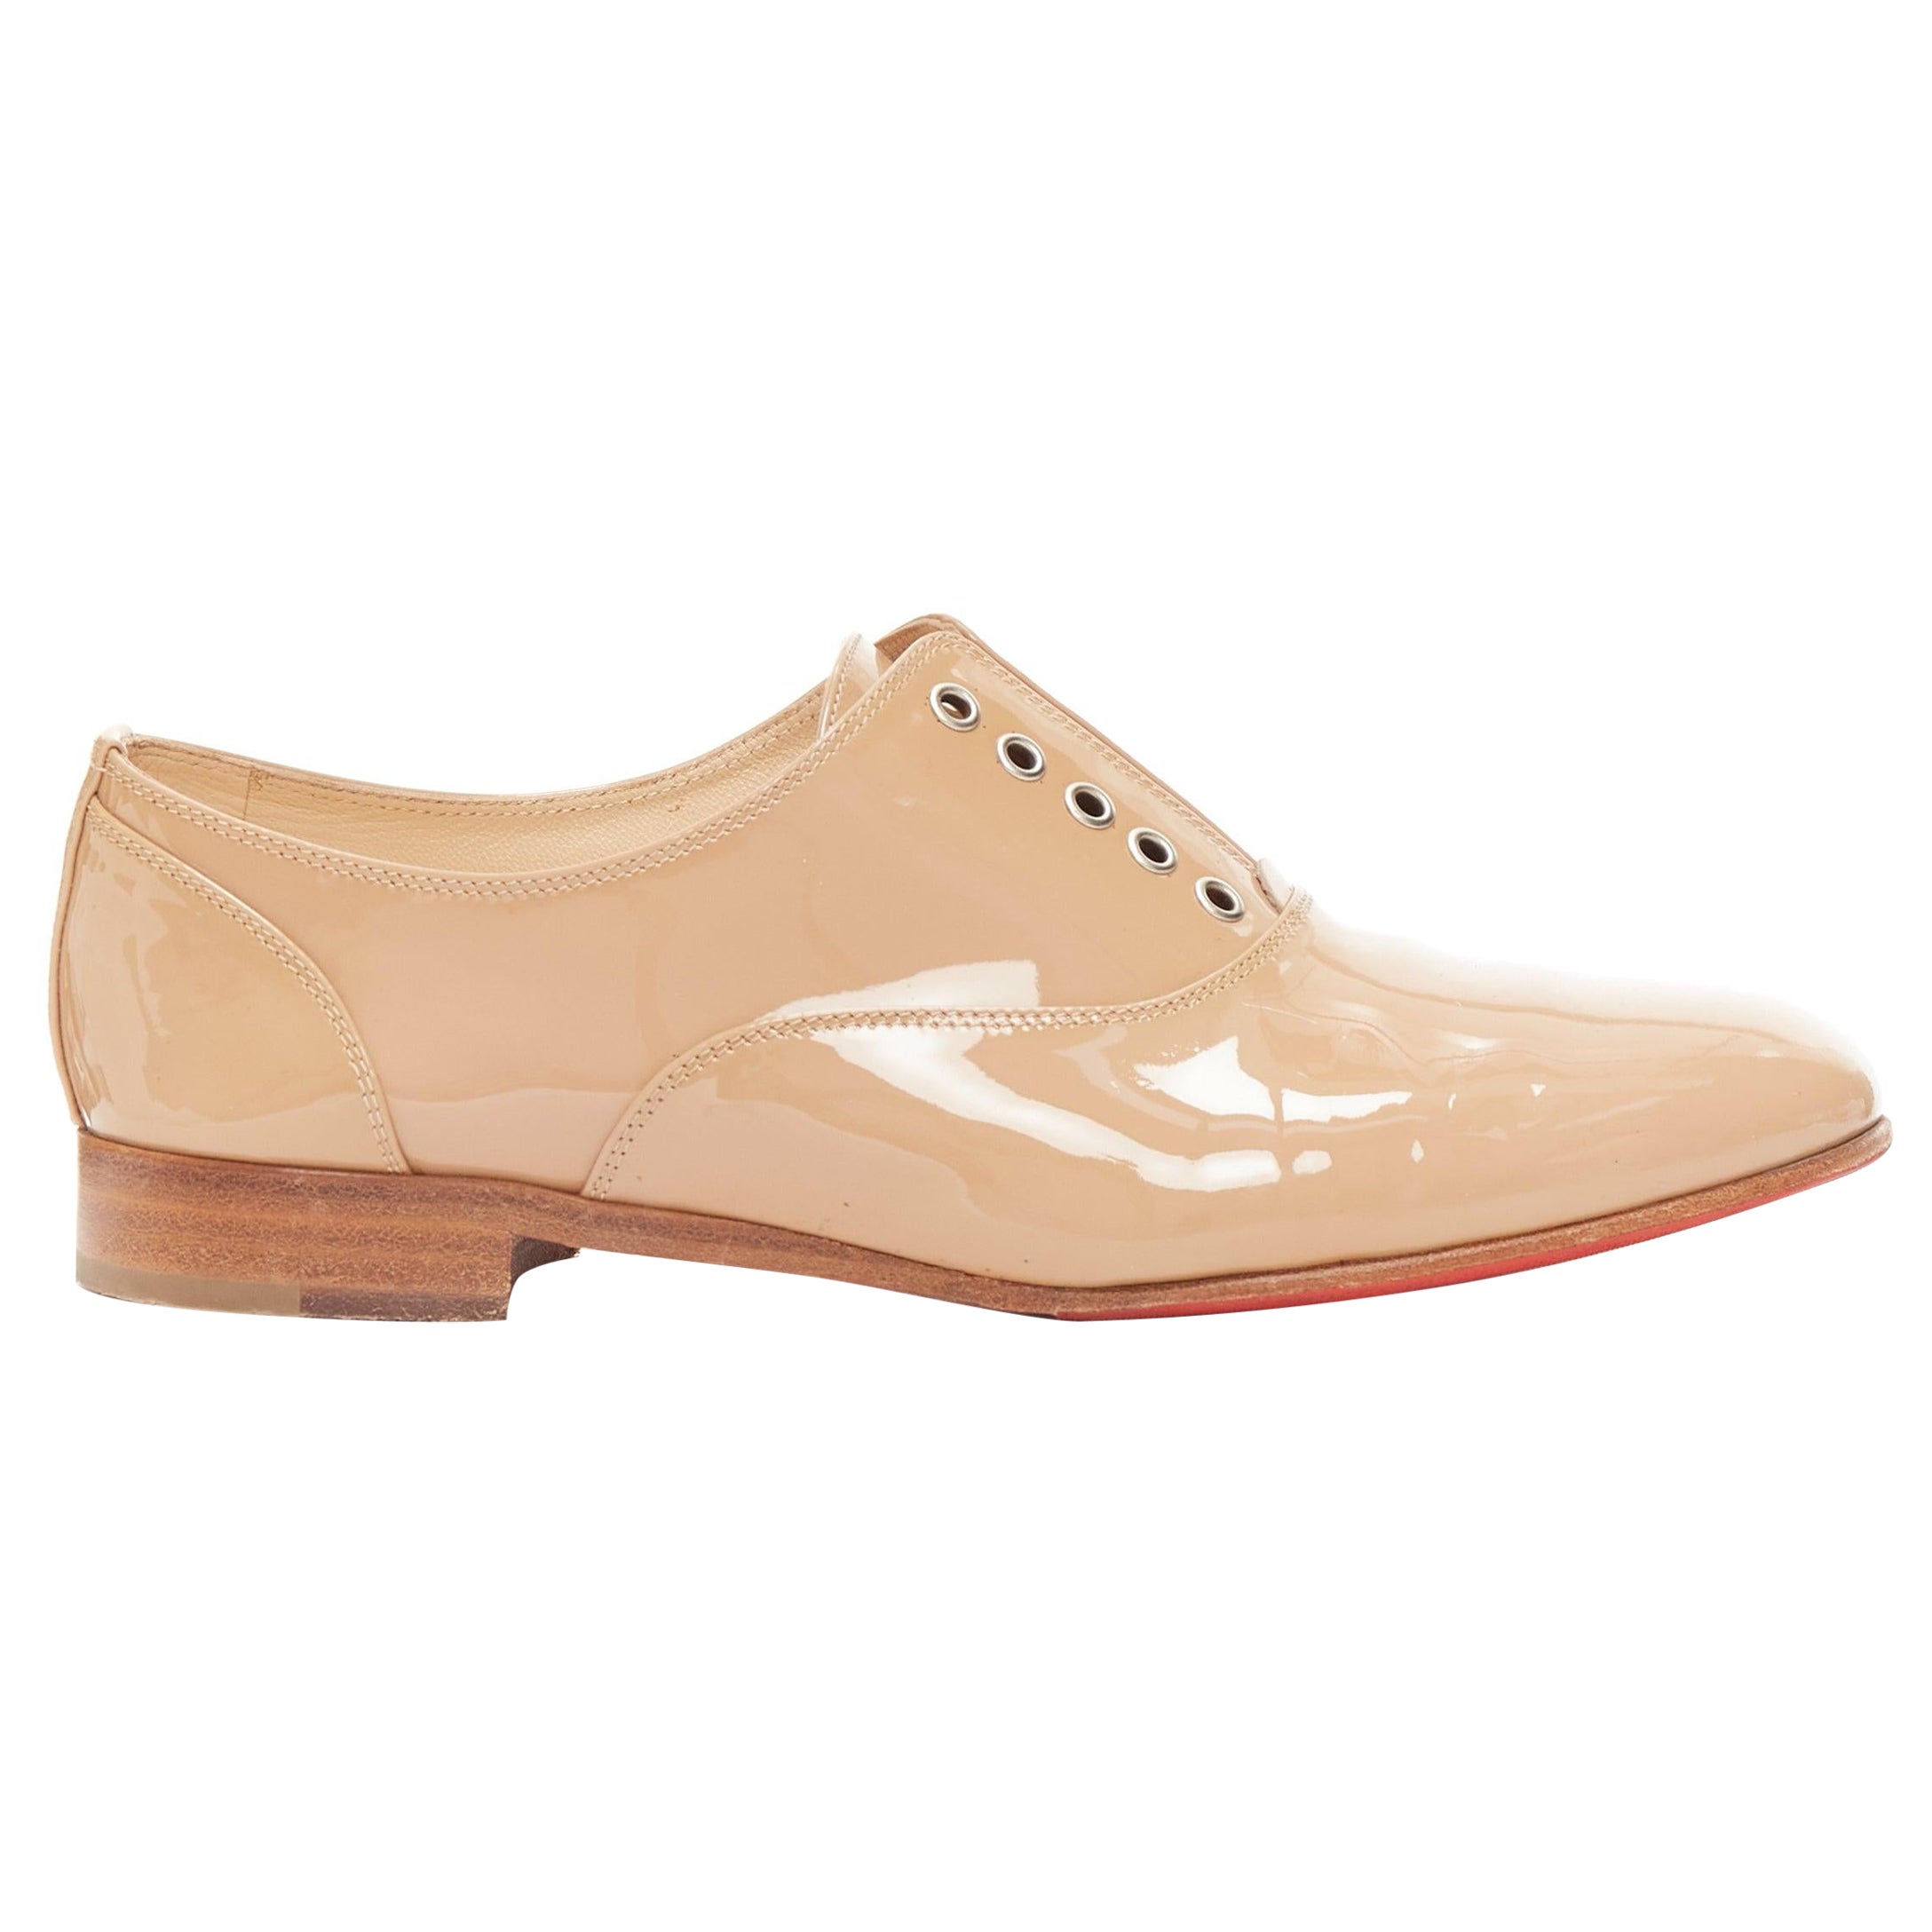 CHRISTIAN LOUBOUTIN beige patent leather round toe derby flat shoes EU35.5 For Sale